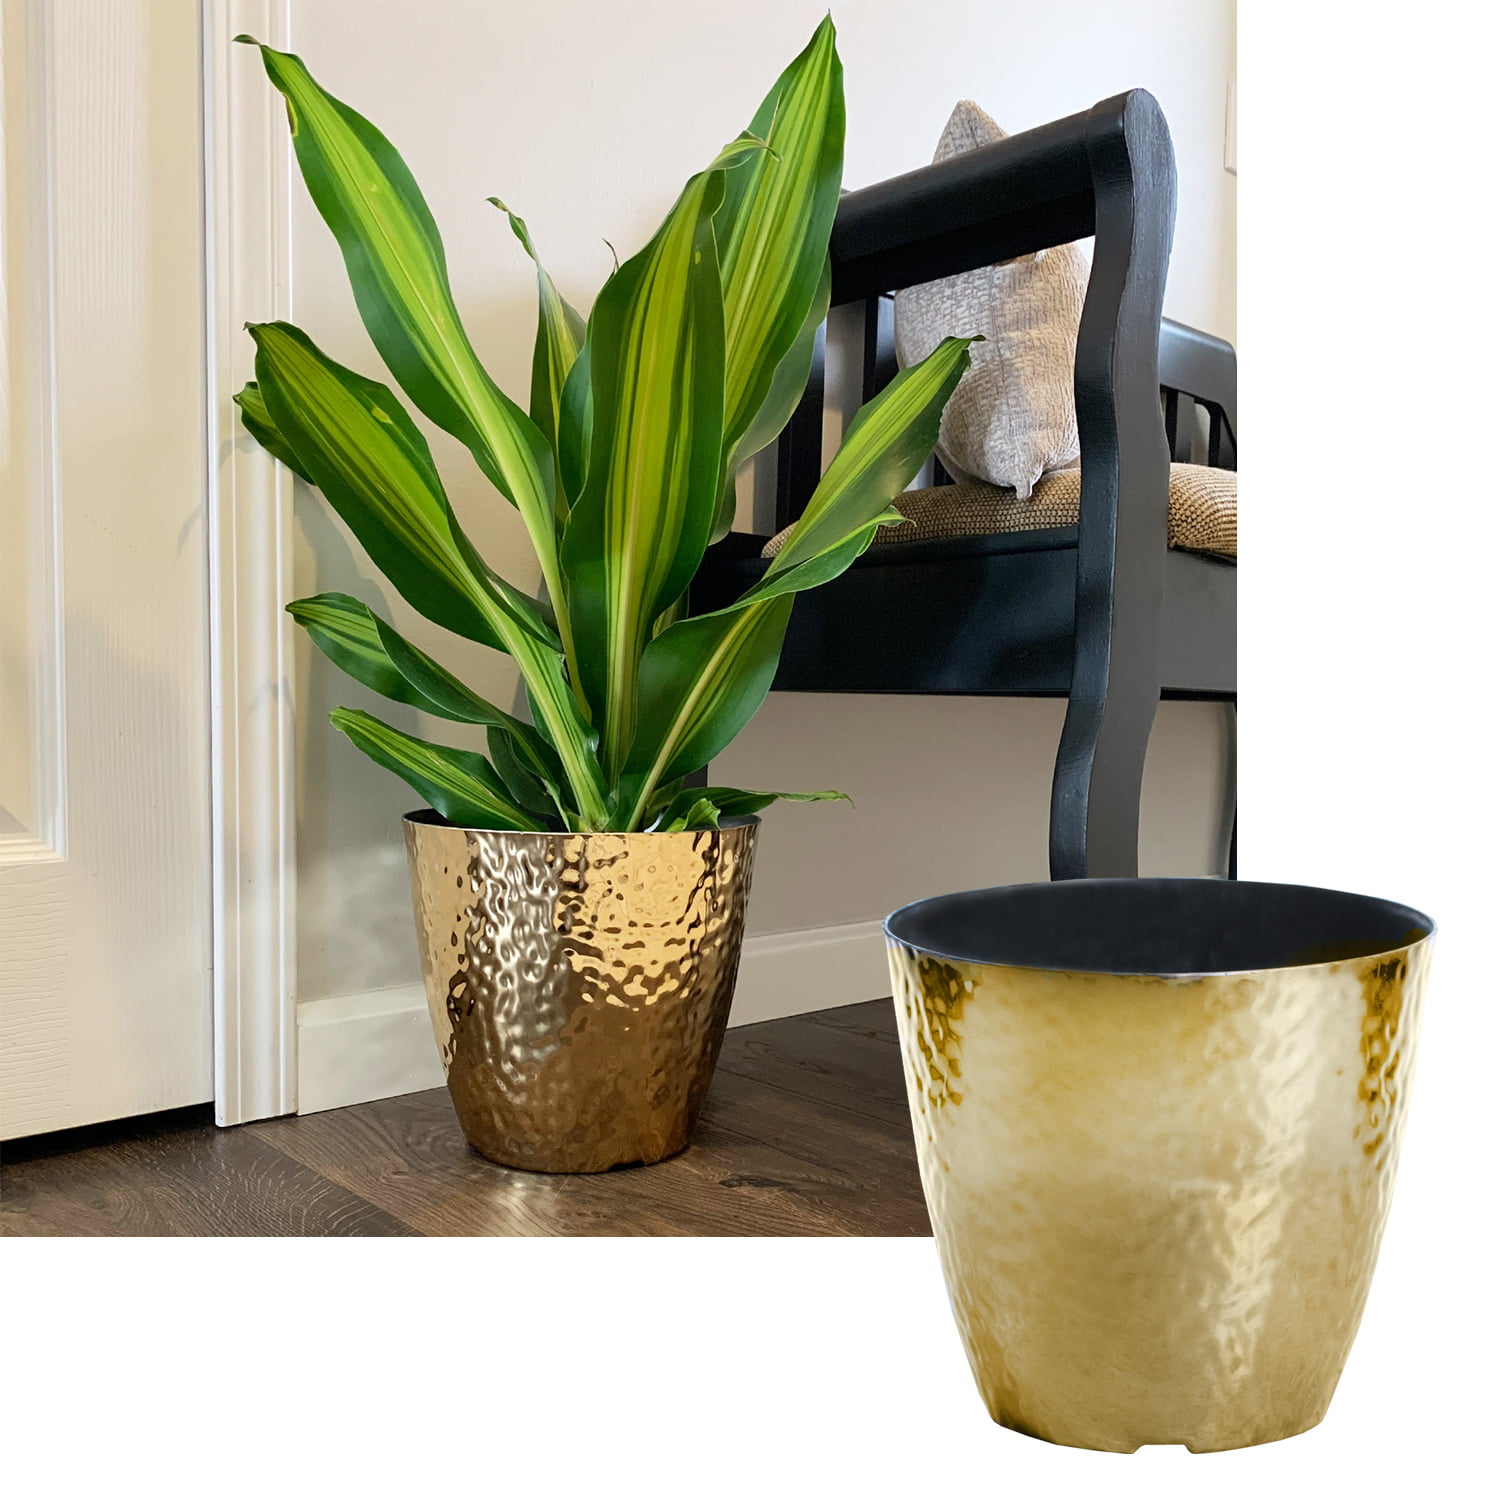 3.1 x 3.1 x 11.8 Inches Juvale Artificial Plant with Grey Cement Planter Pot 